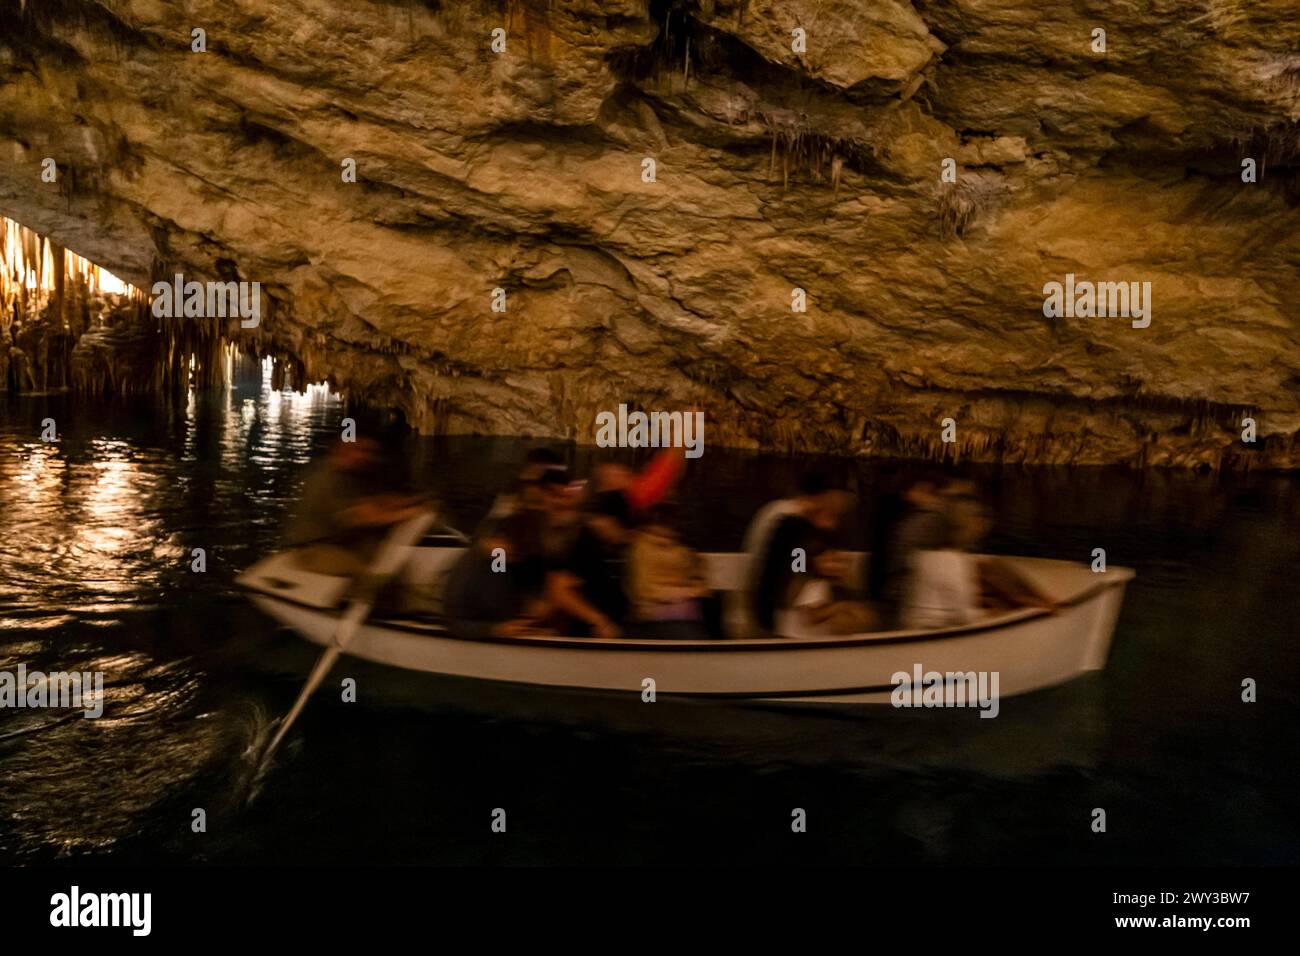 People in the boat on lake in amazing Drach Caves in Mallorca, Spain Stock Photo